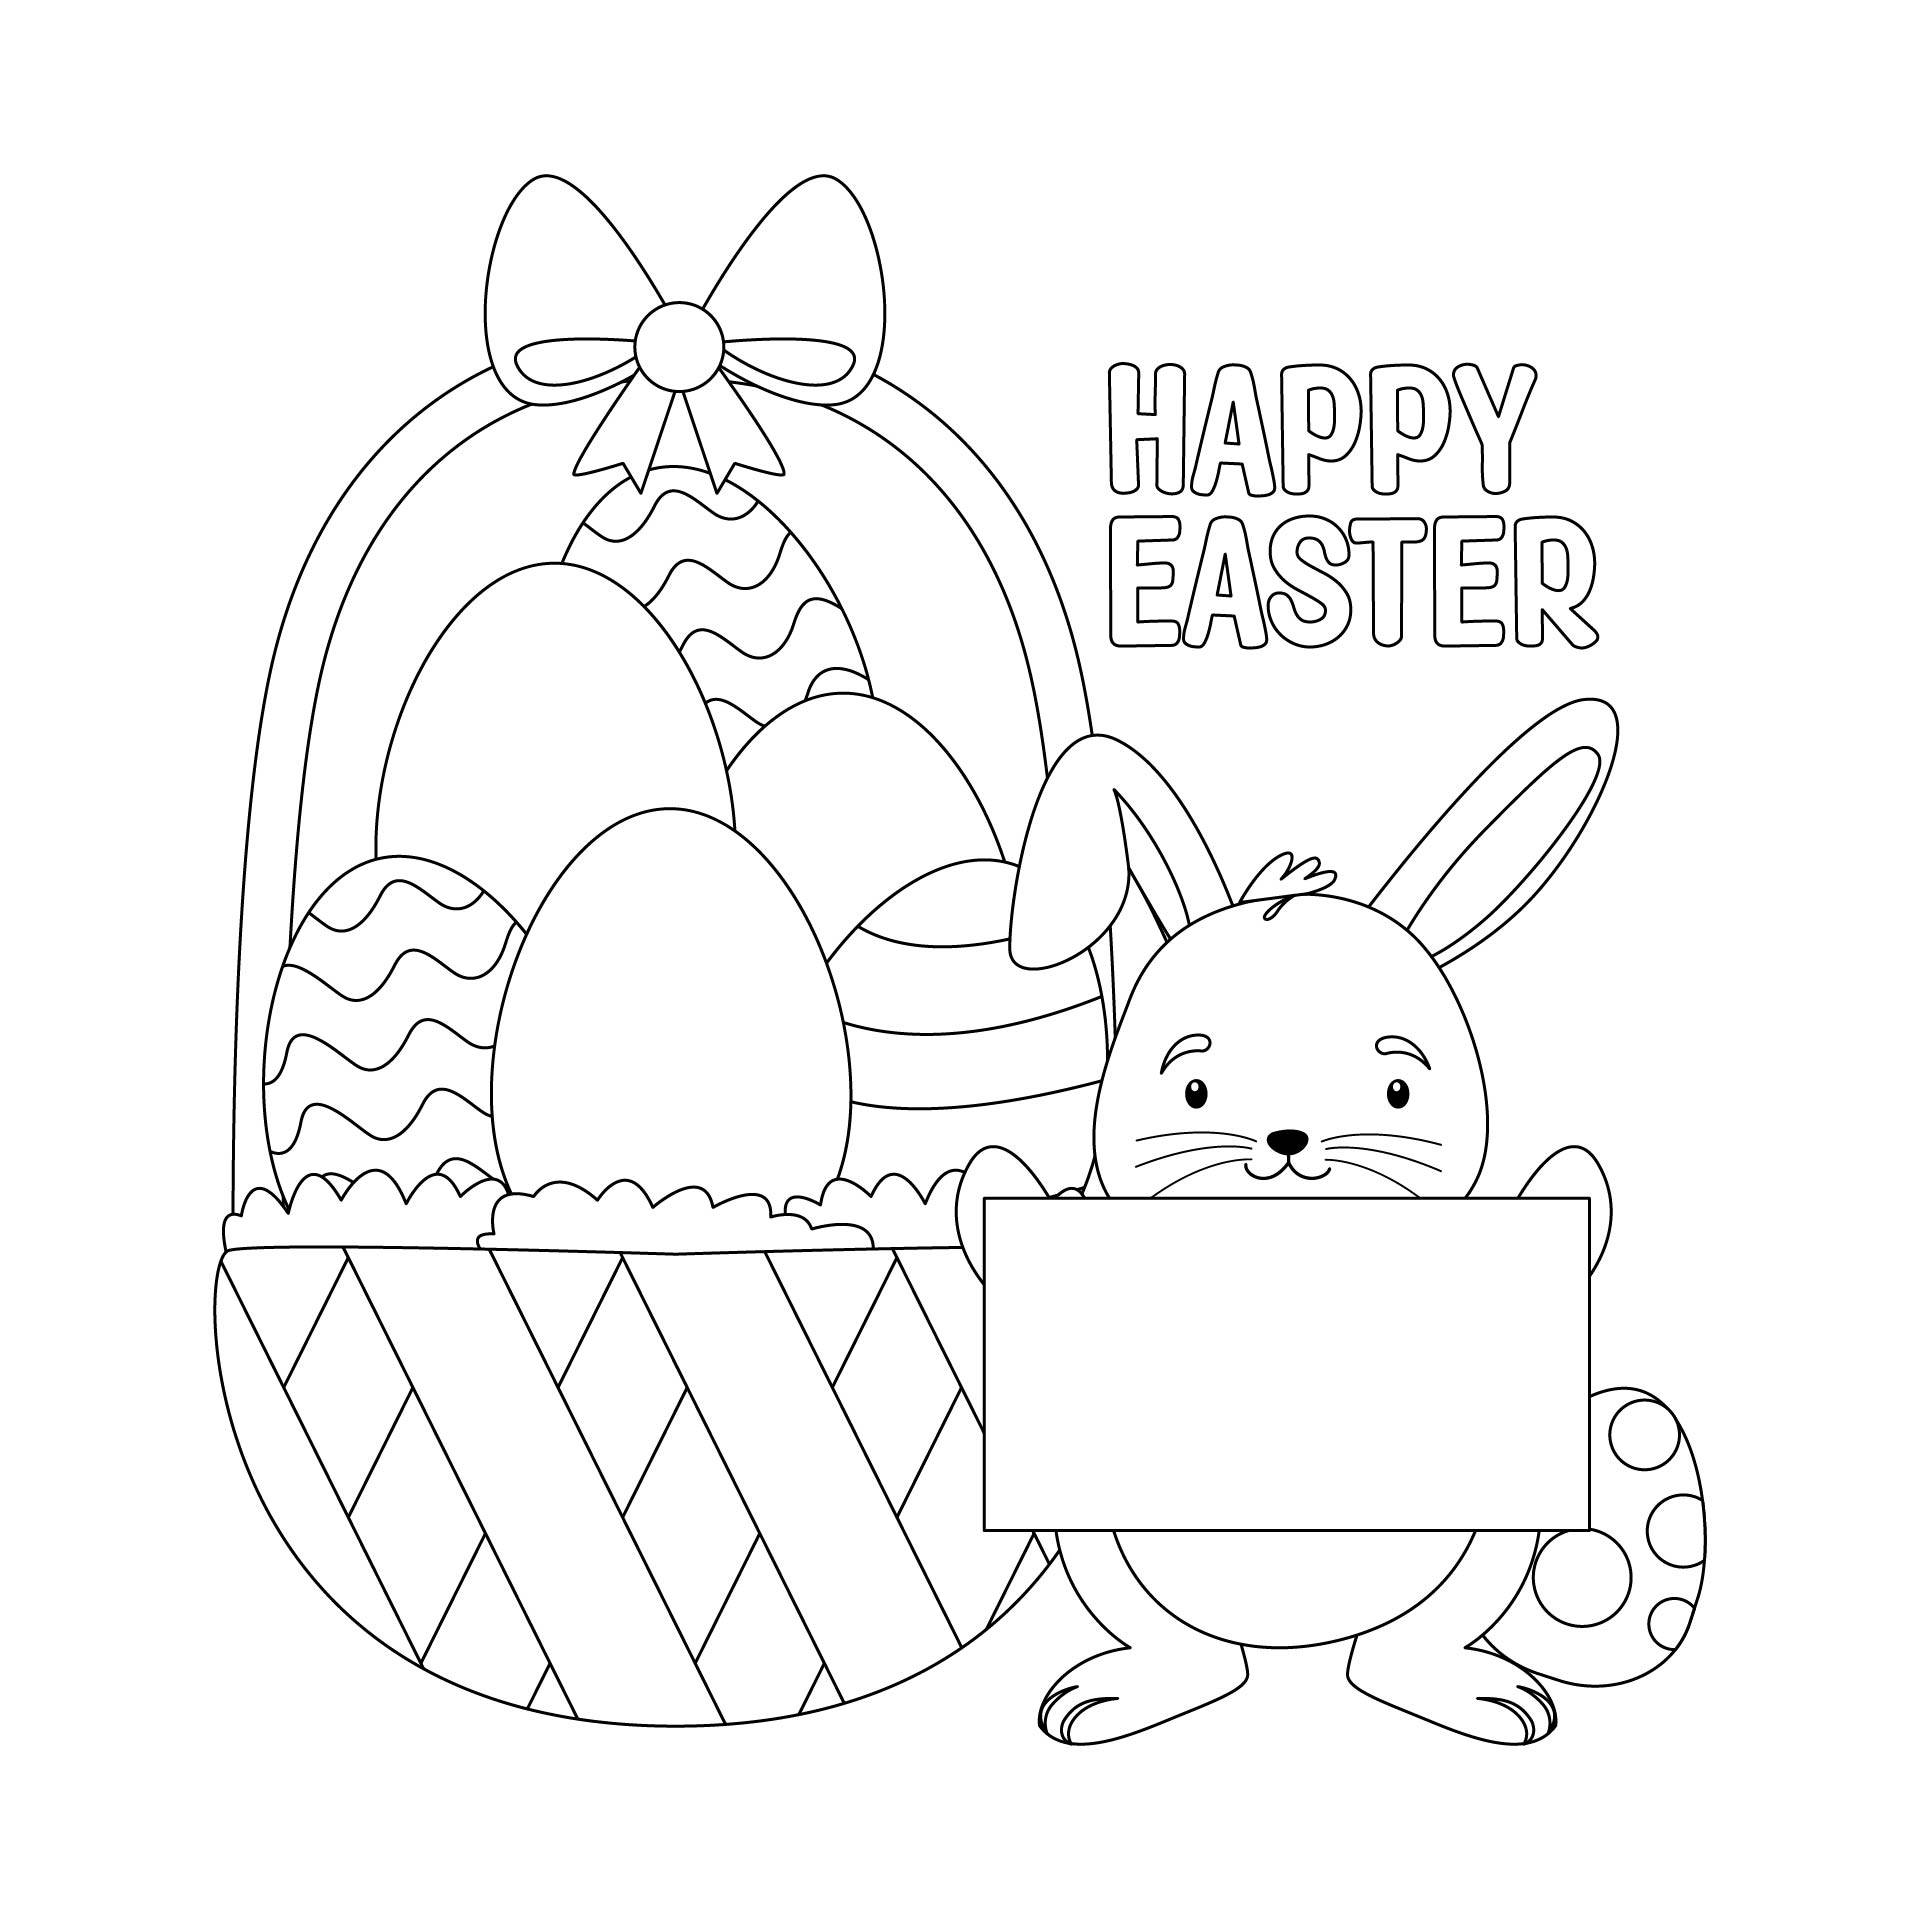 Printable Happy Easter Basket Coloring Page